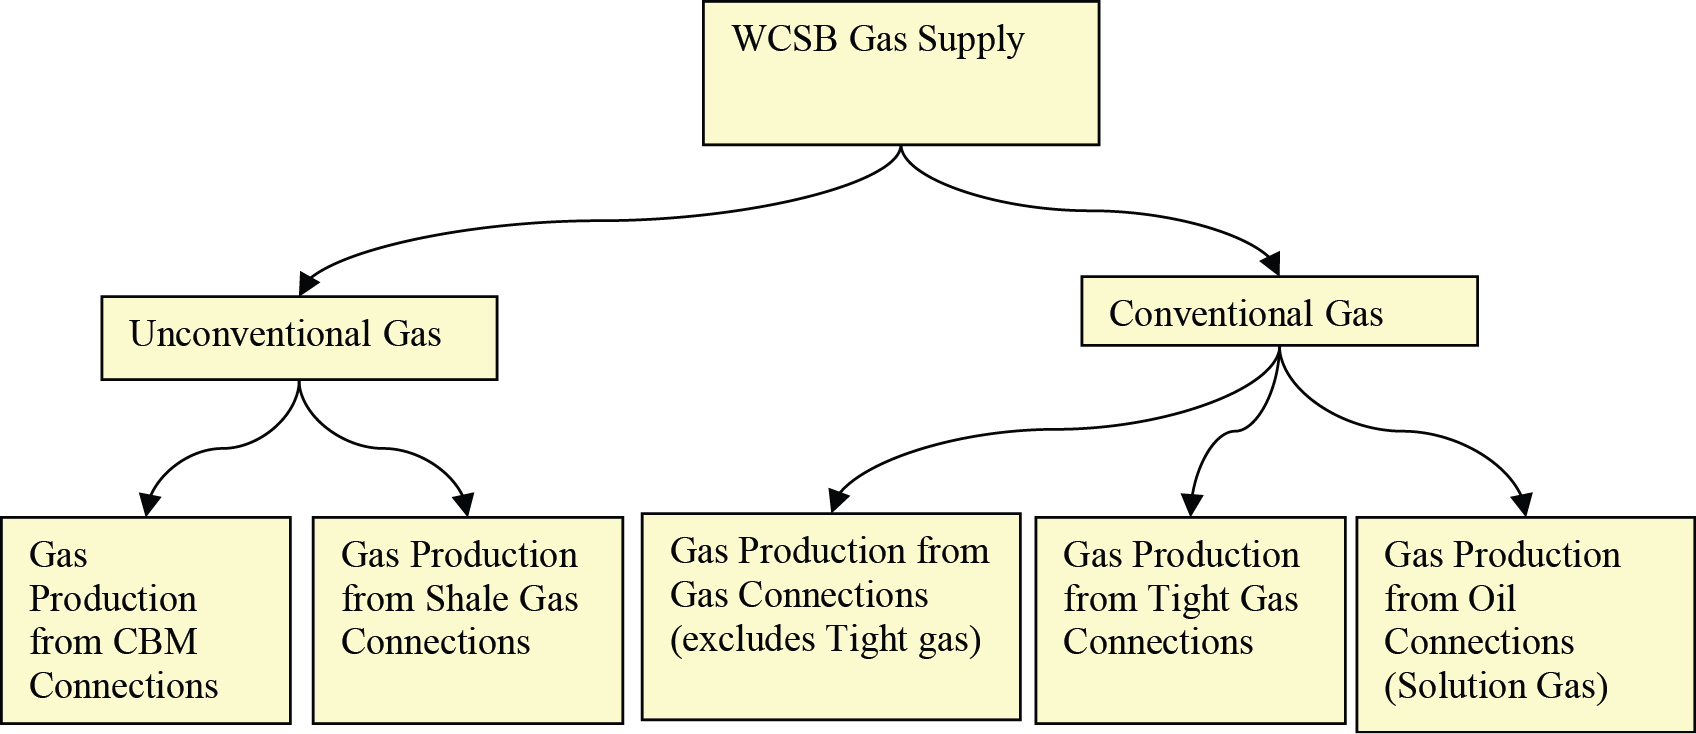 Figure A1.1 – WCSB Major Gas Supply Categories for Deliverability Assessment